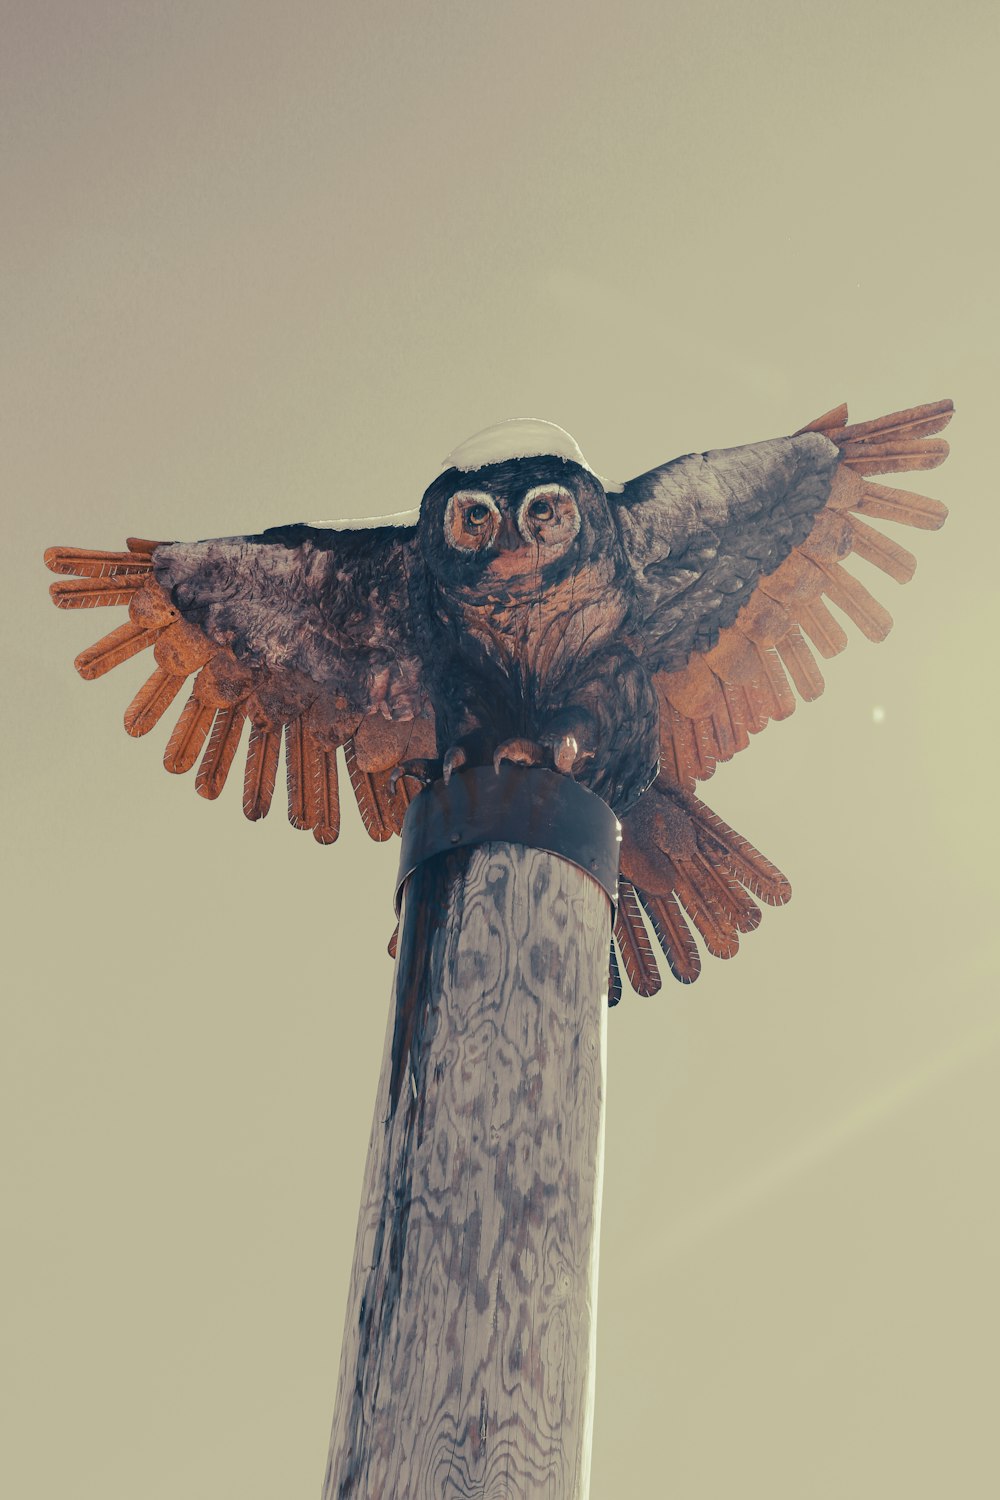 an owl perched on top of a wooden pole